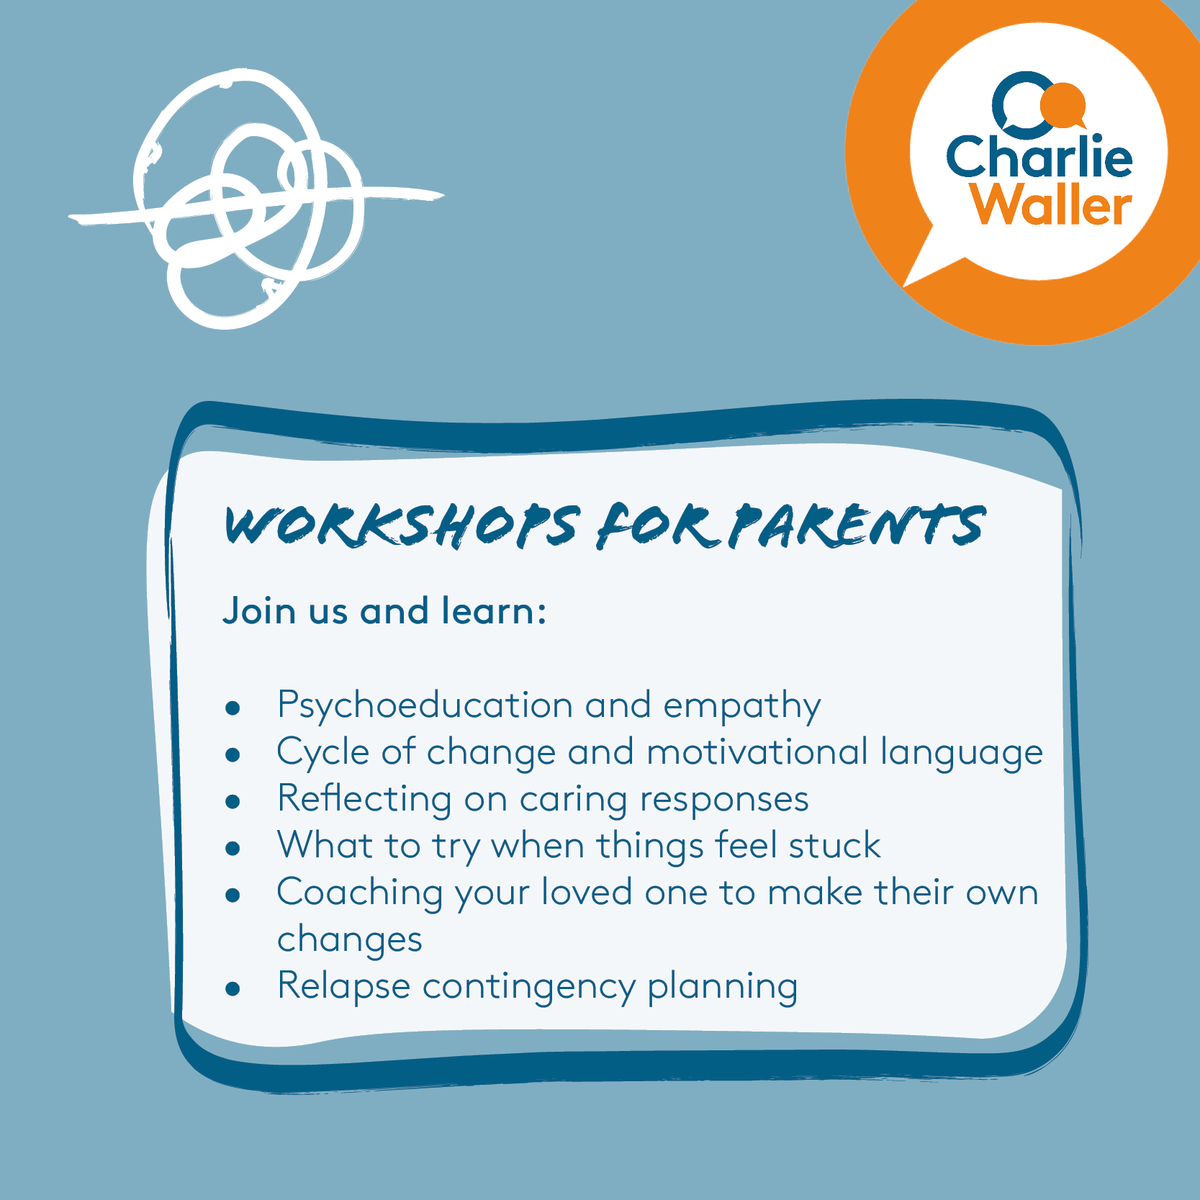 Does your child have problems around eating? Join our free online workshops and learn how to support them. Find out more at charliewaller.org/what-we-offer/… #EatingDisorderSupport #EatingDisorderRecovery #CharlieWallerTrust #Parenting #ParentingAdvice #EatingDisorderAwarenessWeek